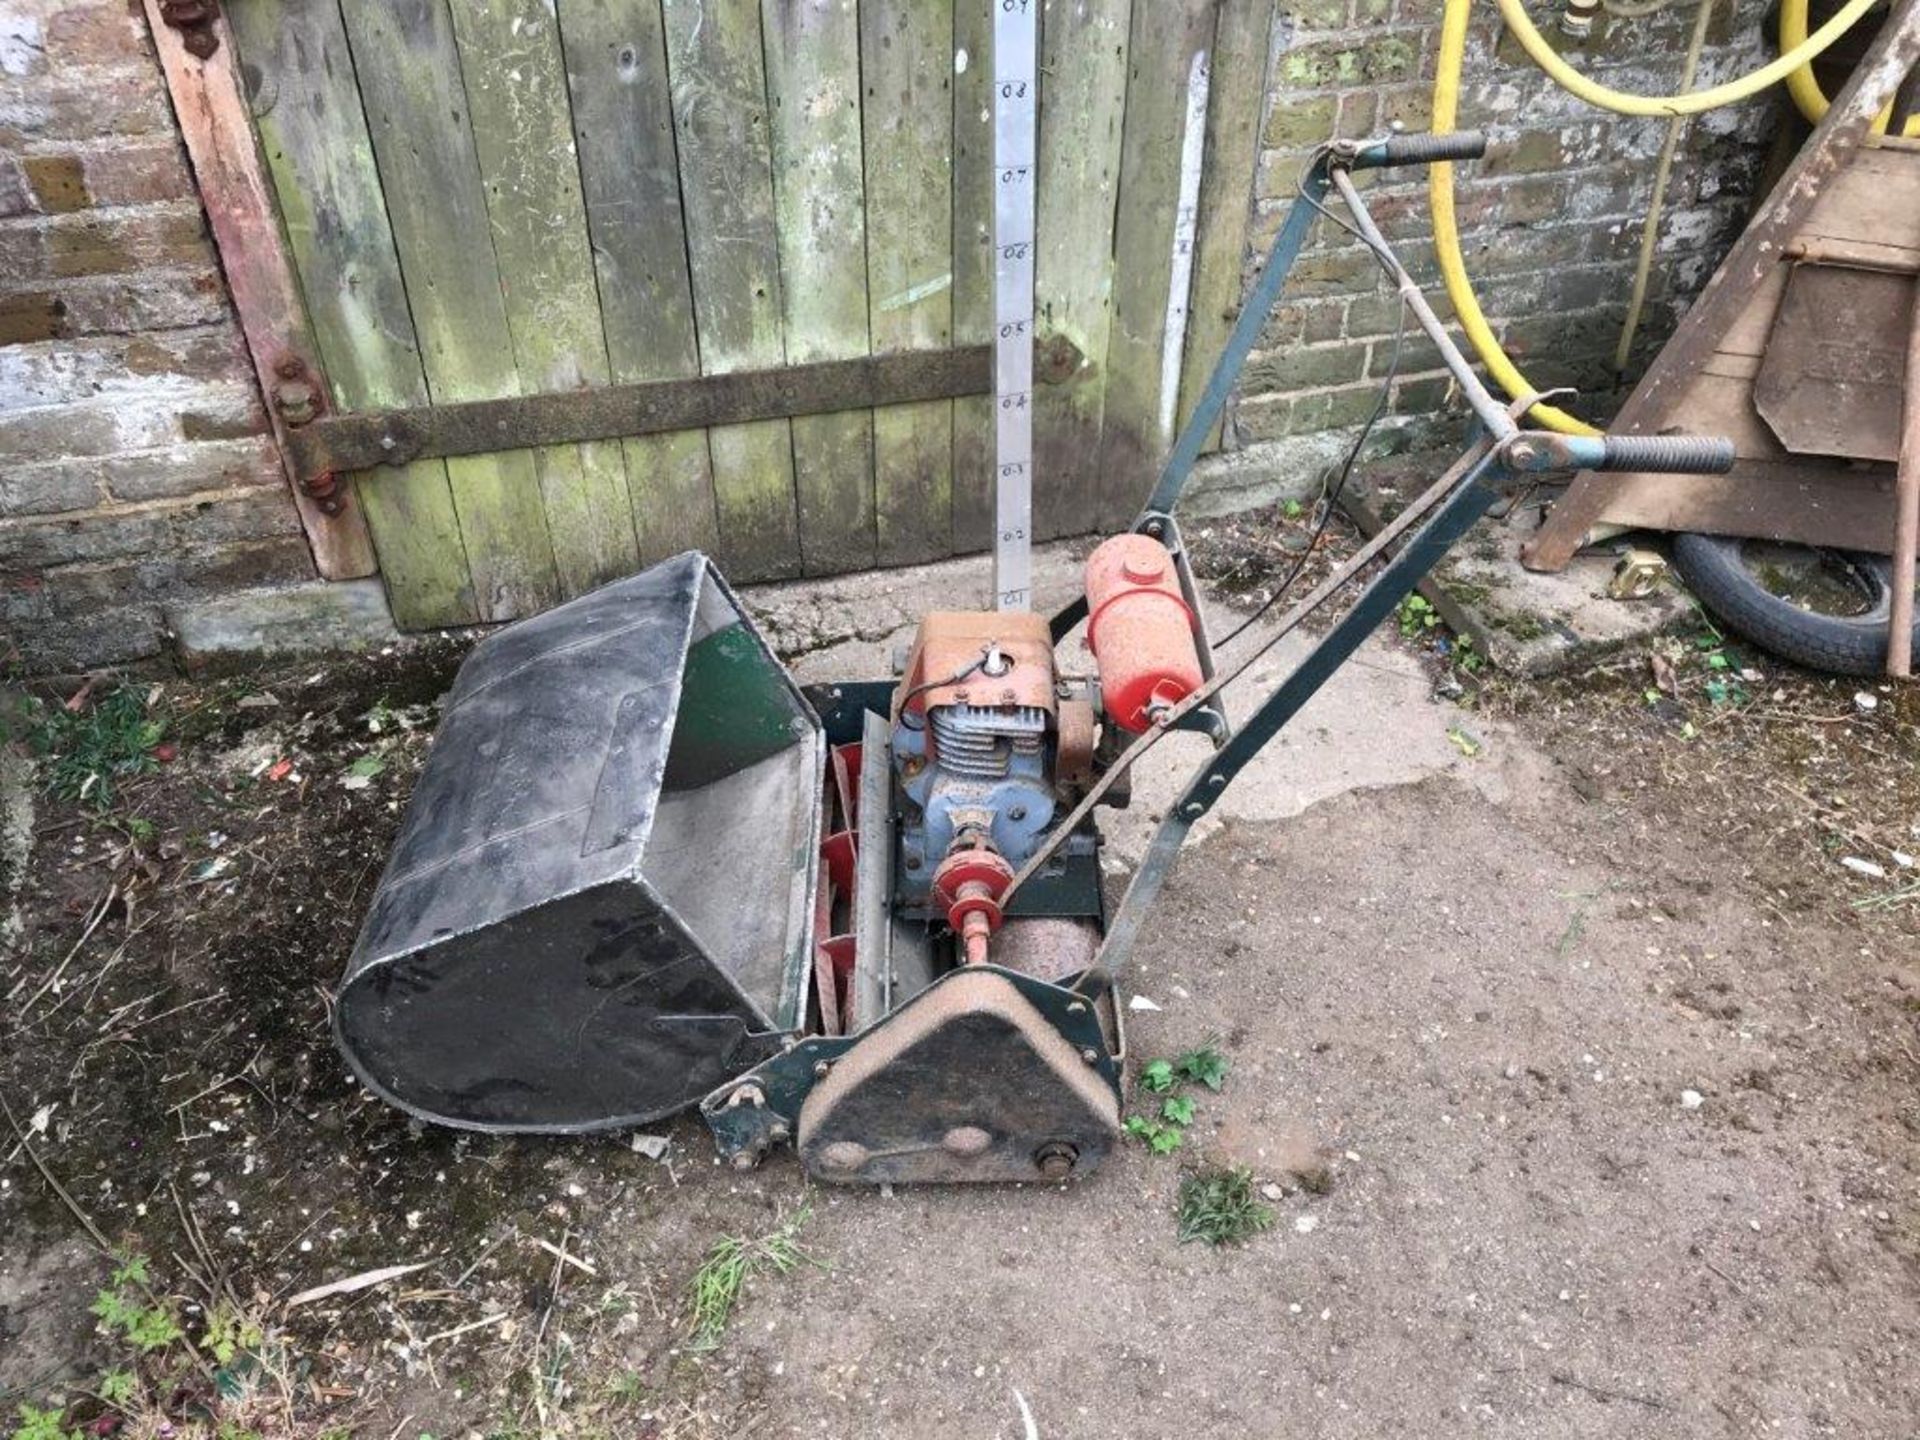 Charles Pugh Limited Cylinder mower with grass catcher